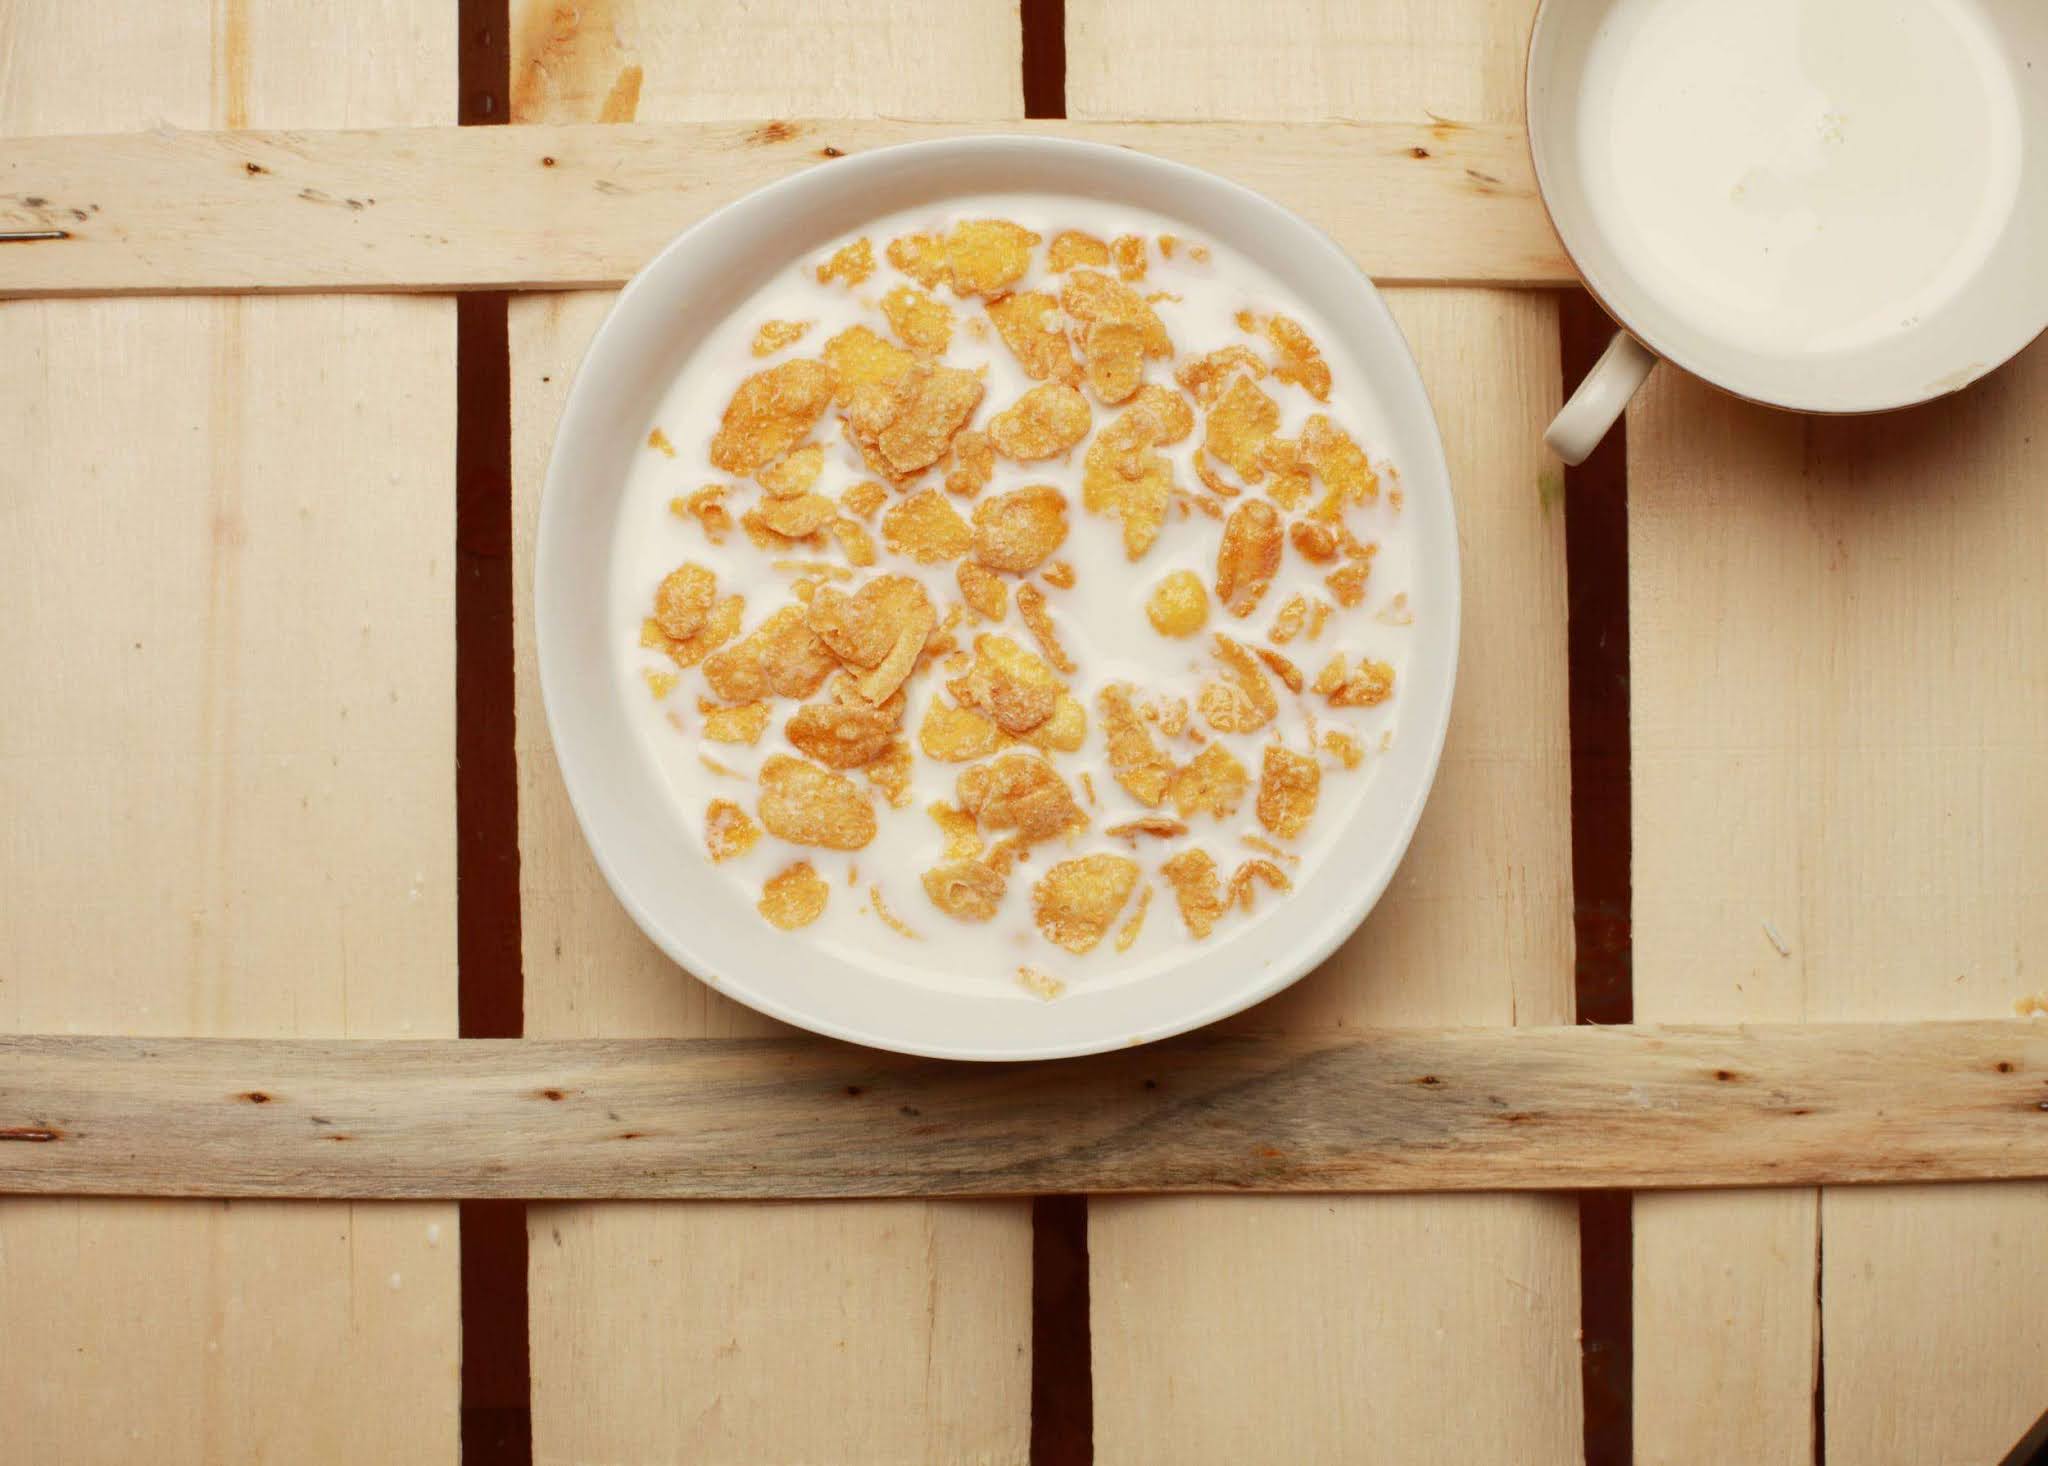 Cereal and milk